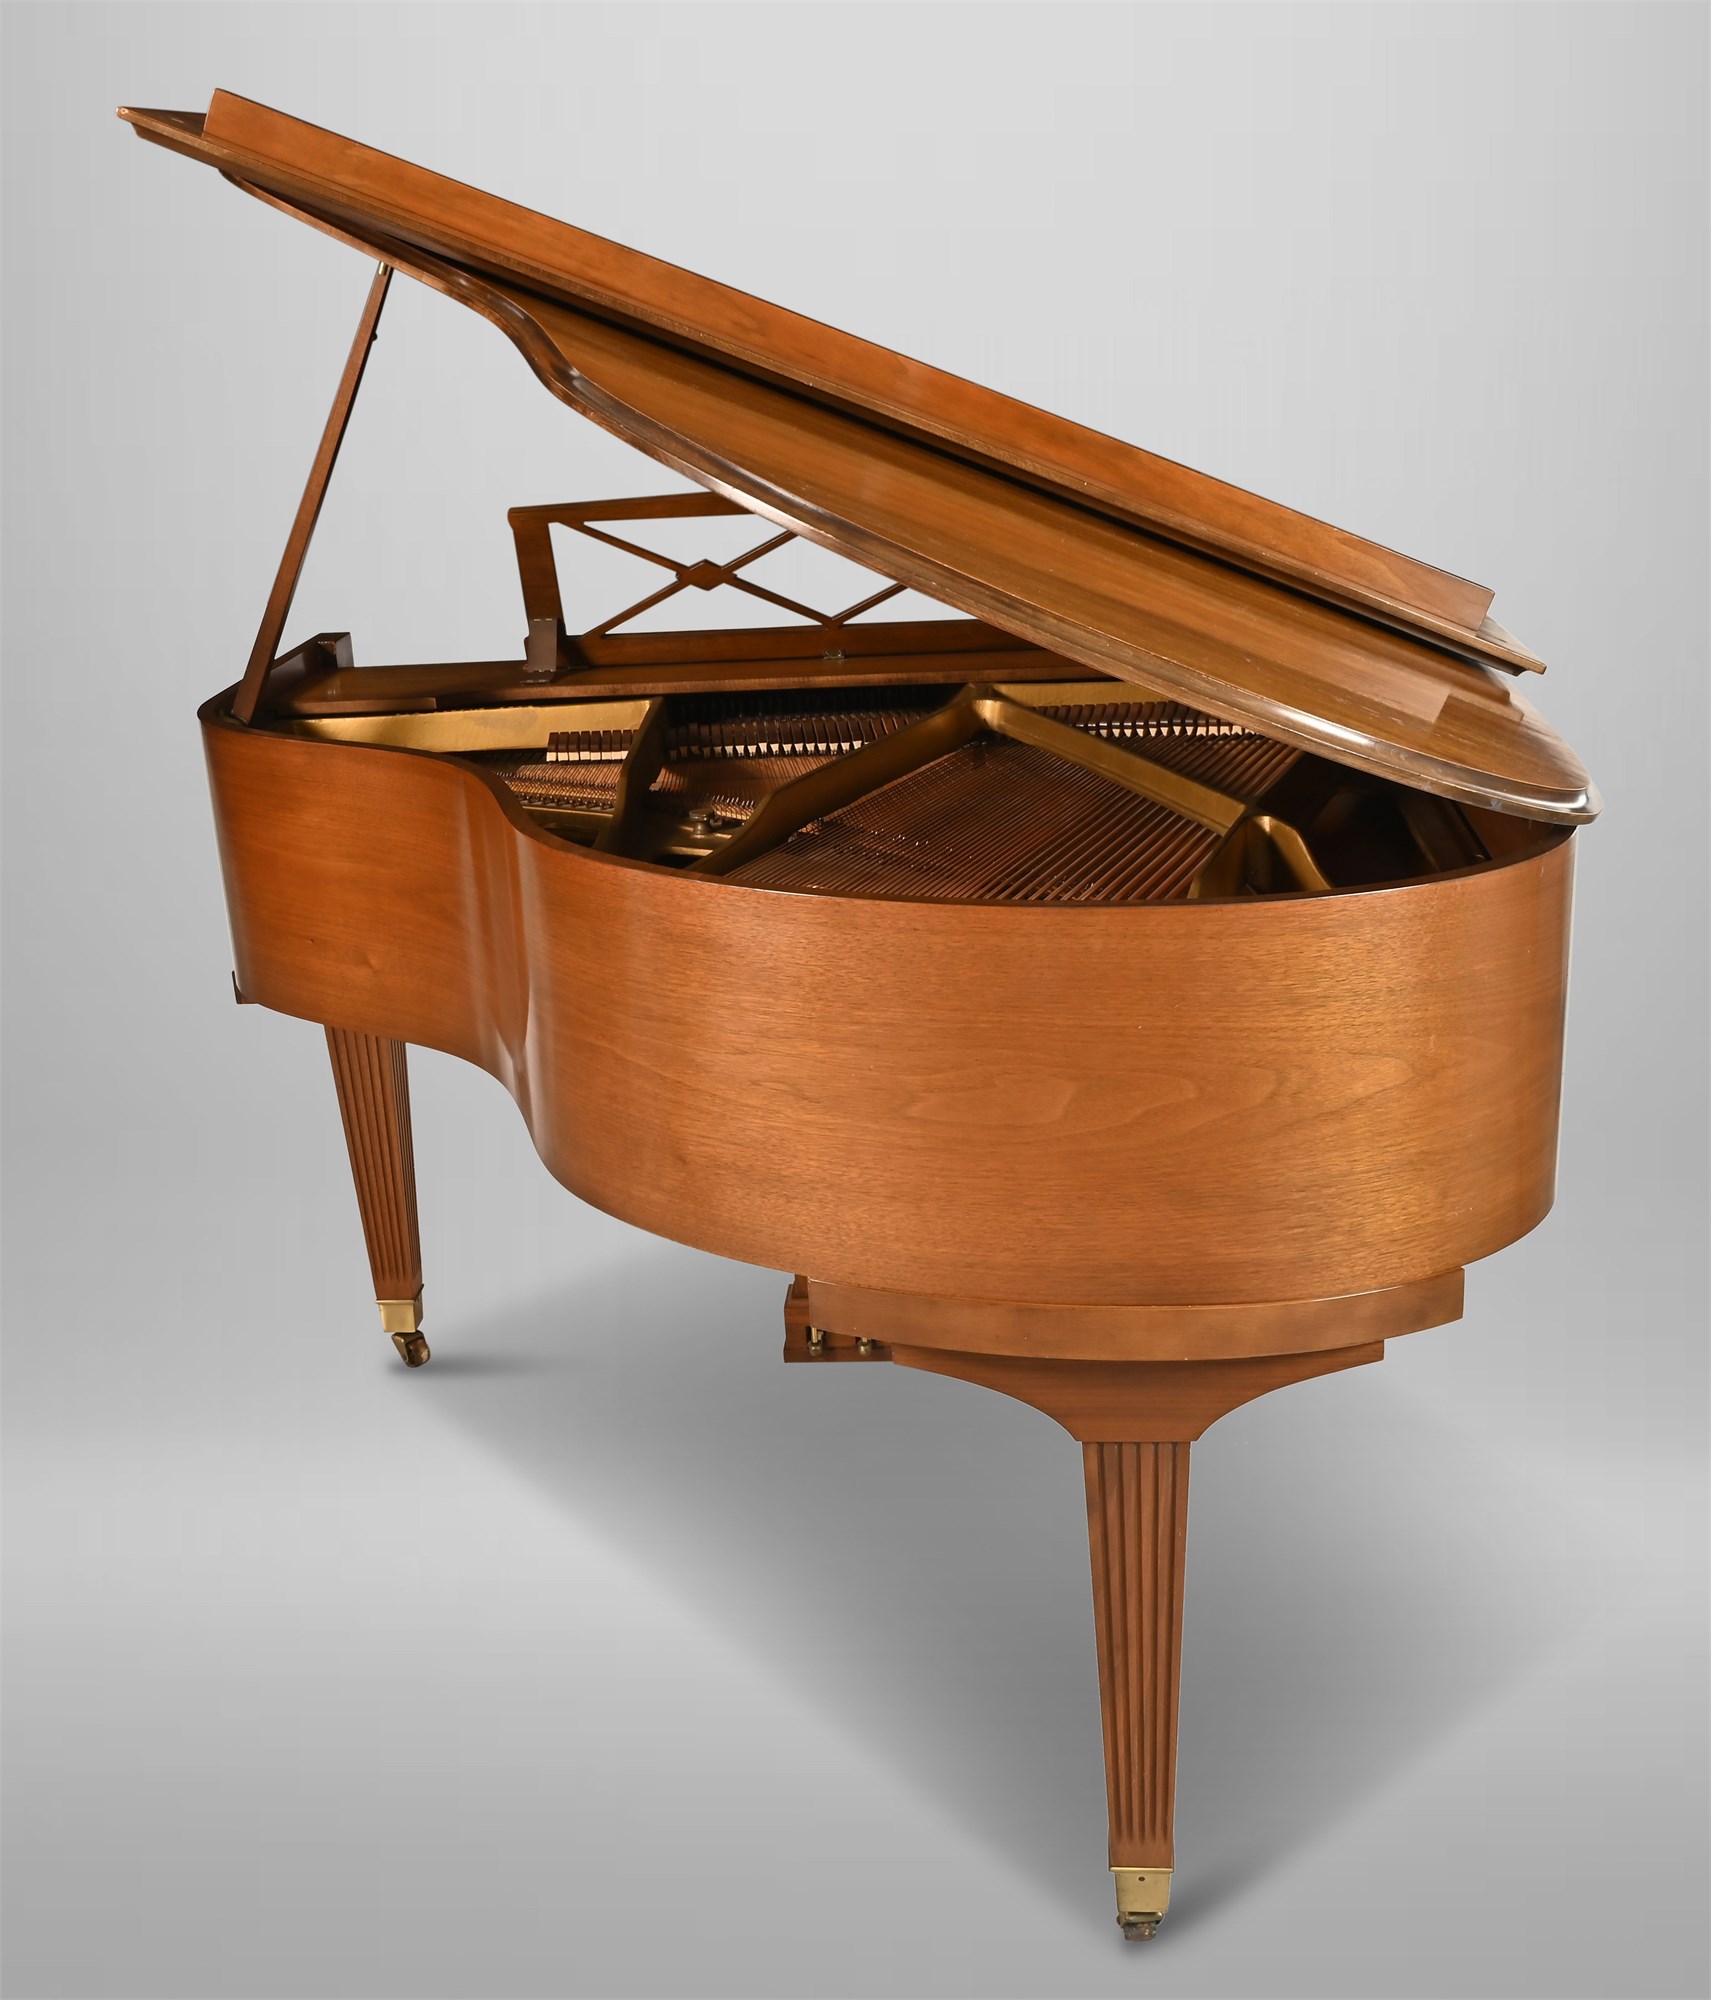 Grand piano is the king of musical instruments - Pakhotin